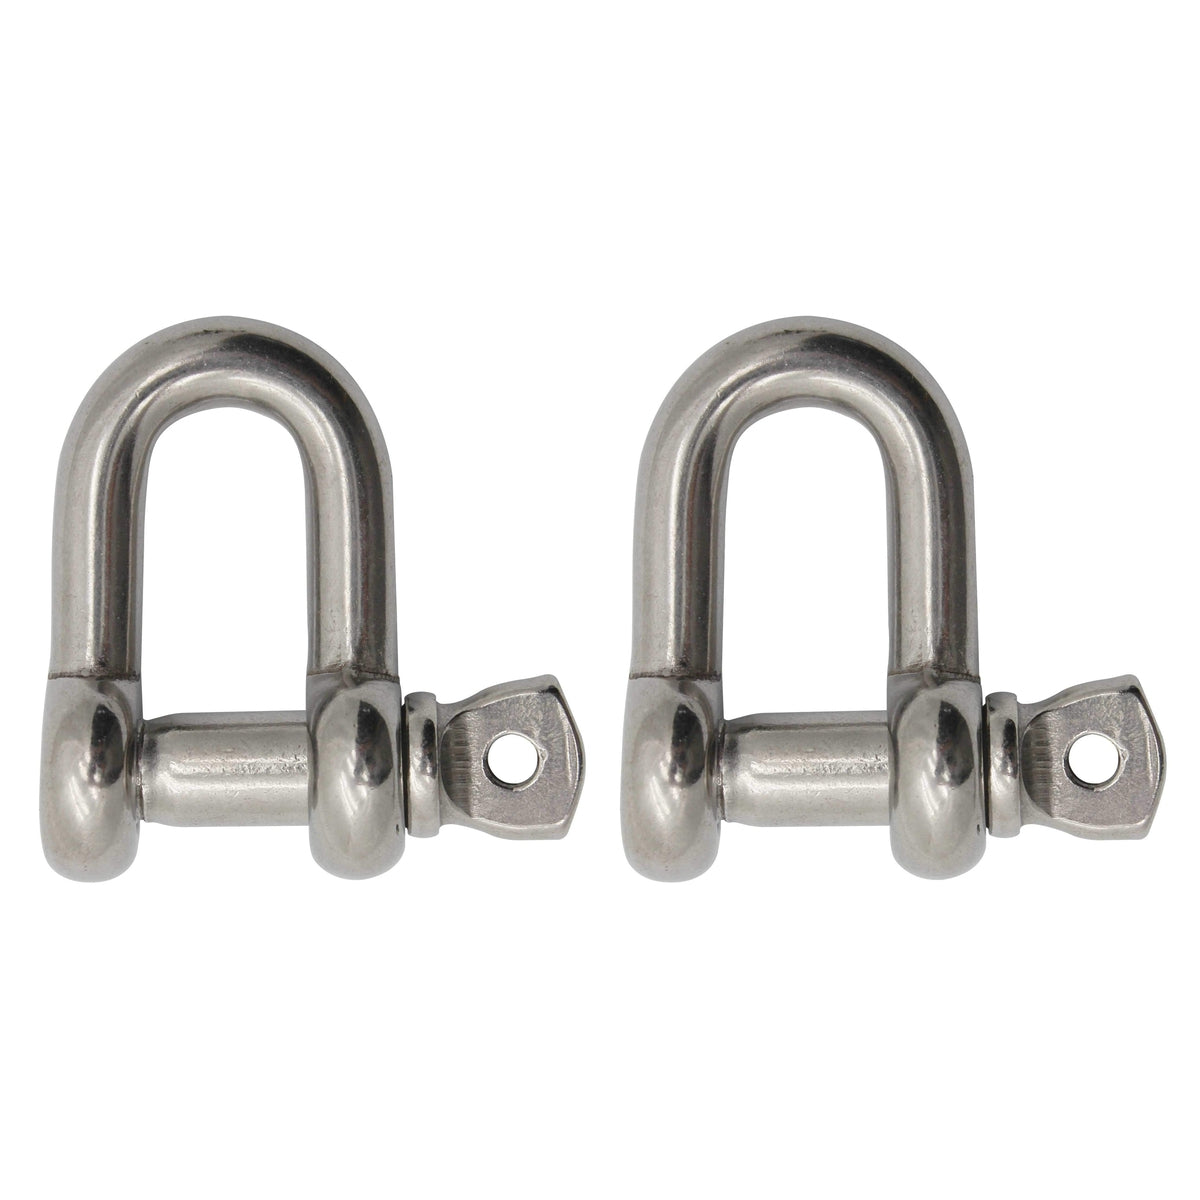 Extreme Max BoatTector SS Chain Shackle 7/8" 2-pk #3006.8282.2